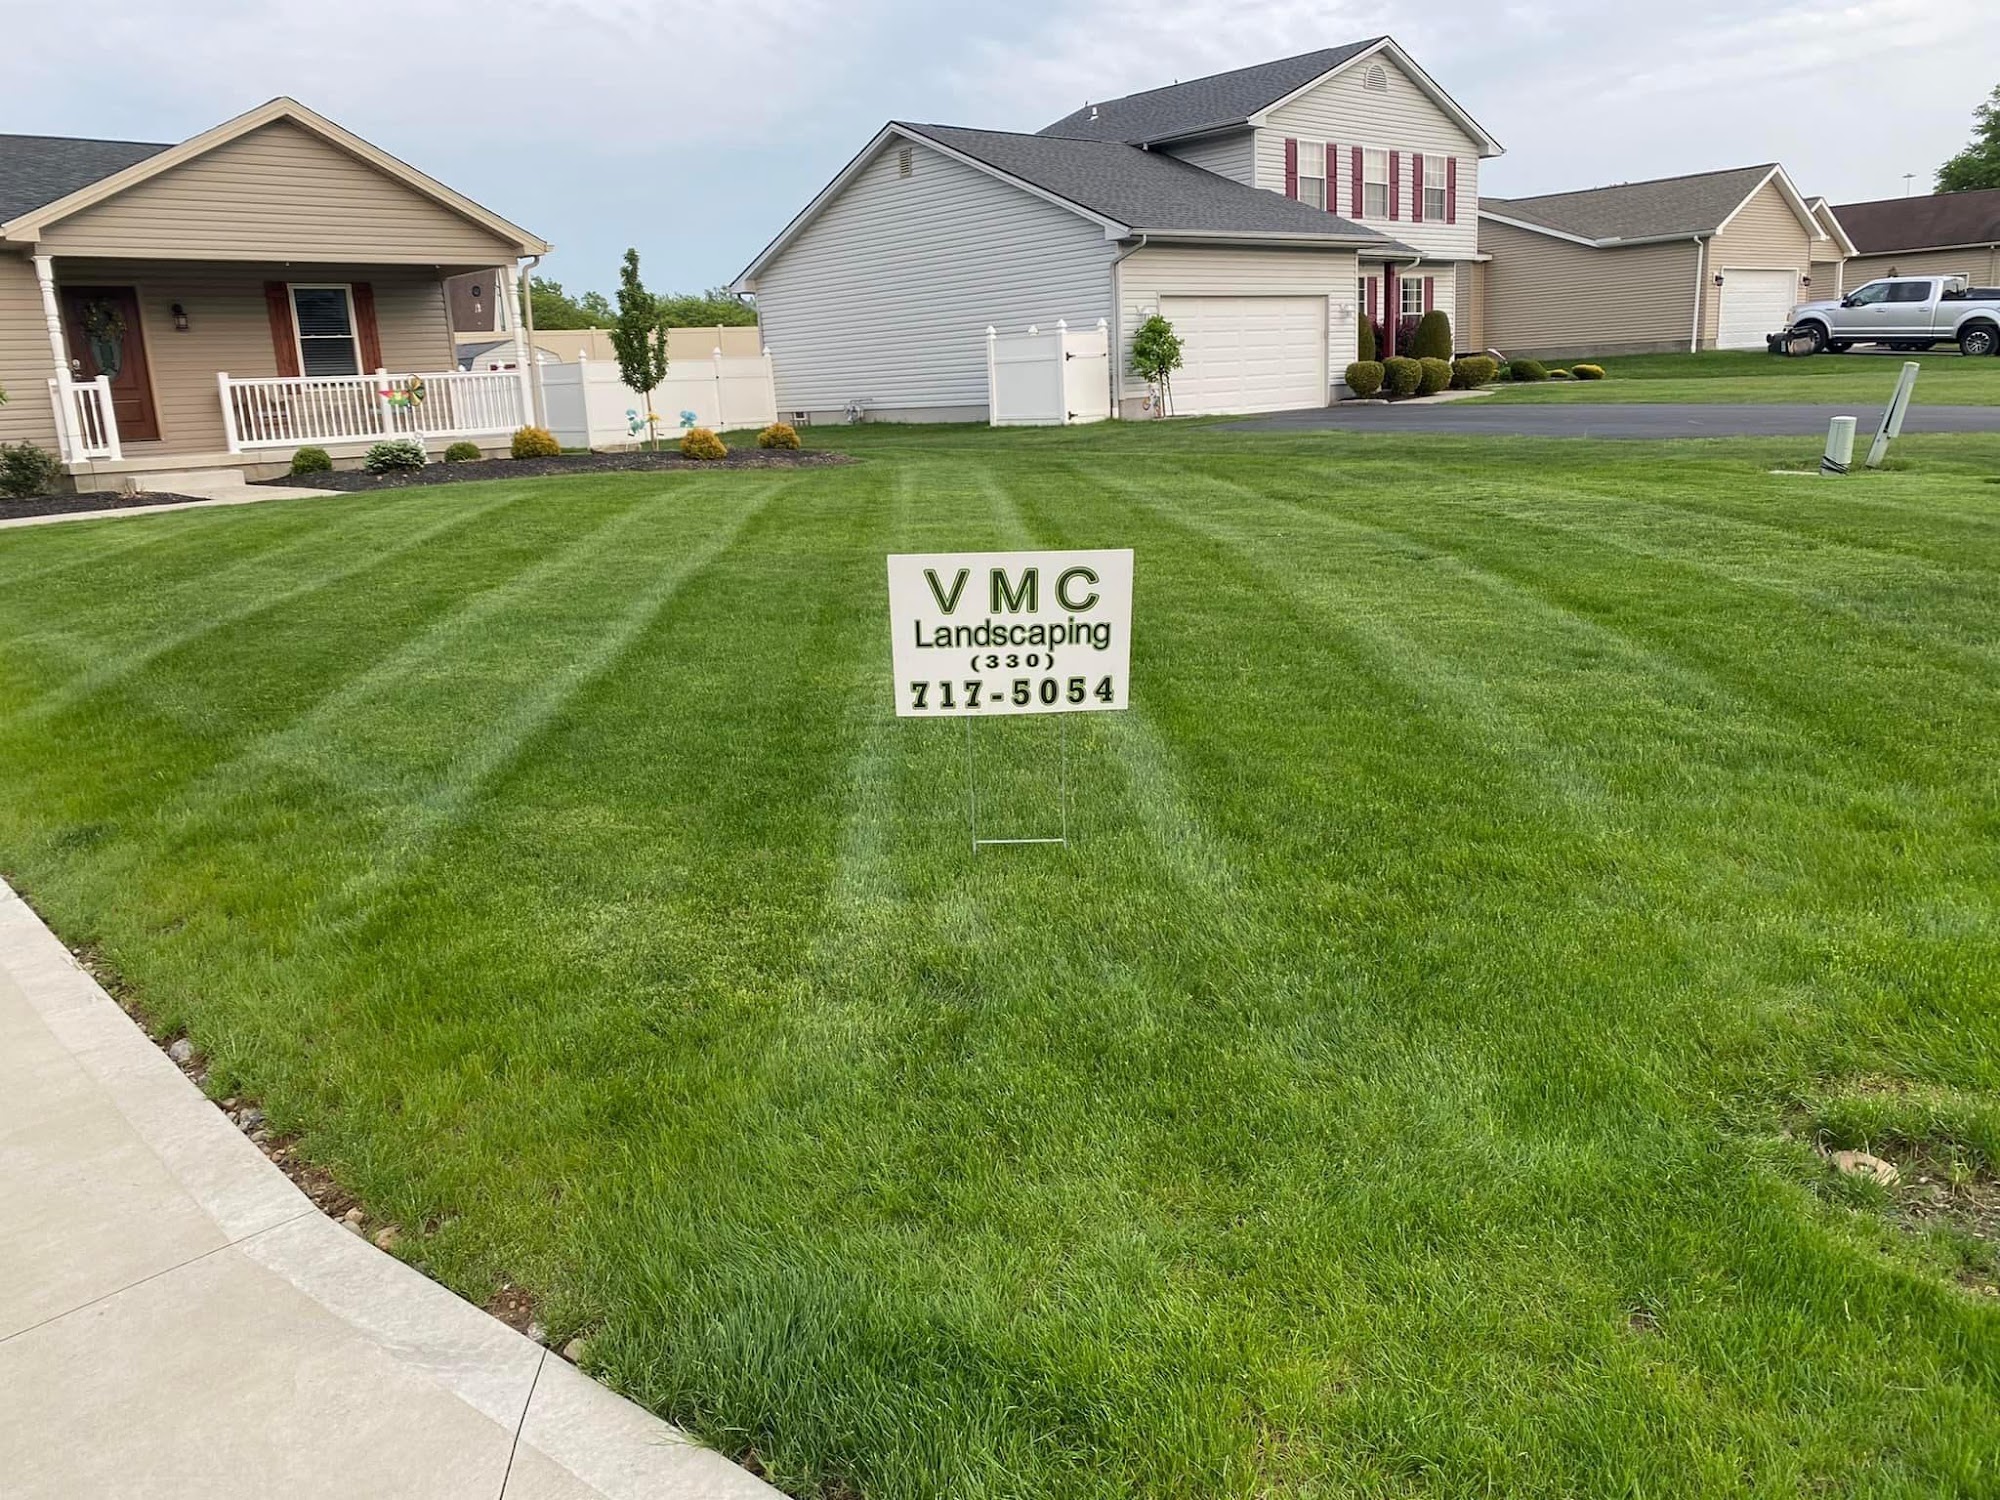 VMC Landscaping 5112 Clearfield Dr, Mineral Ridge Ohio 44440